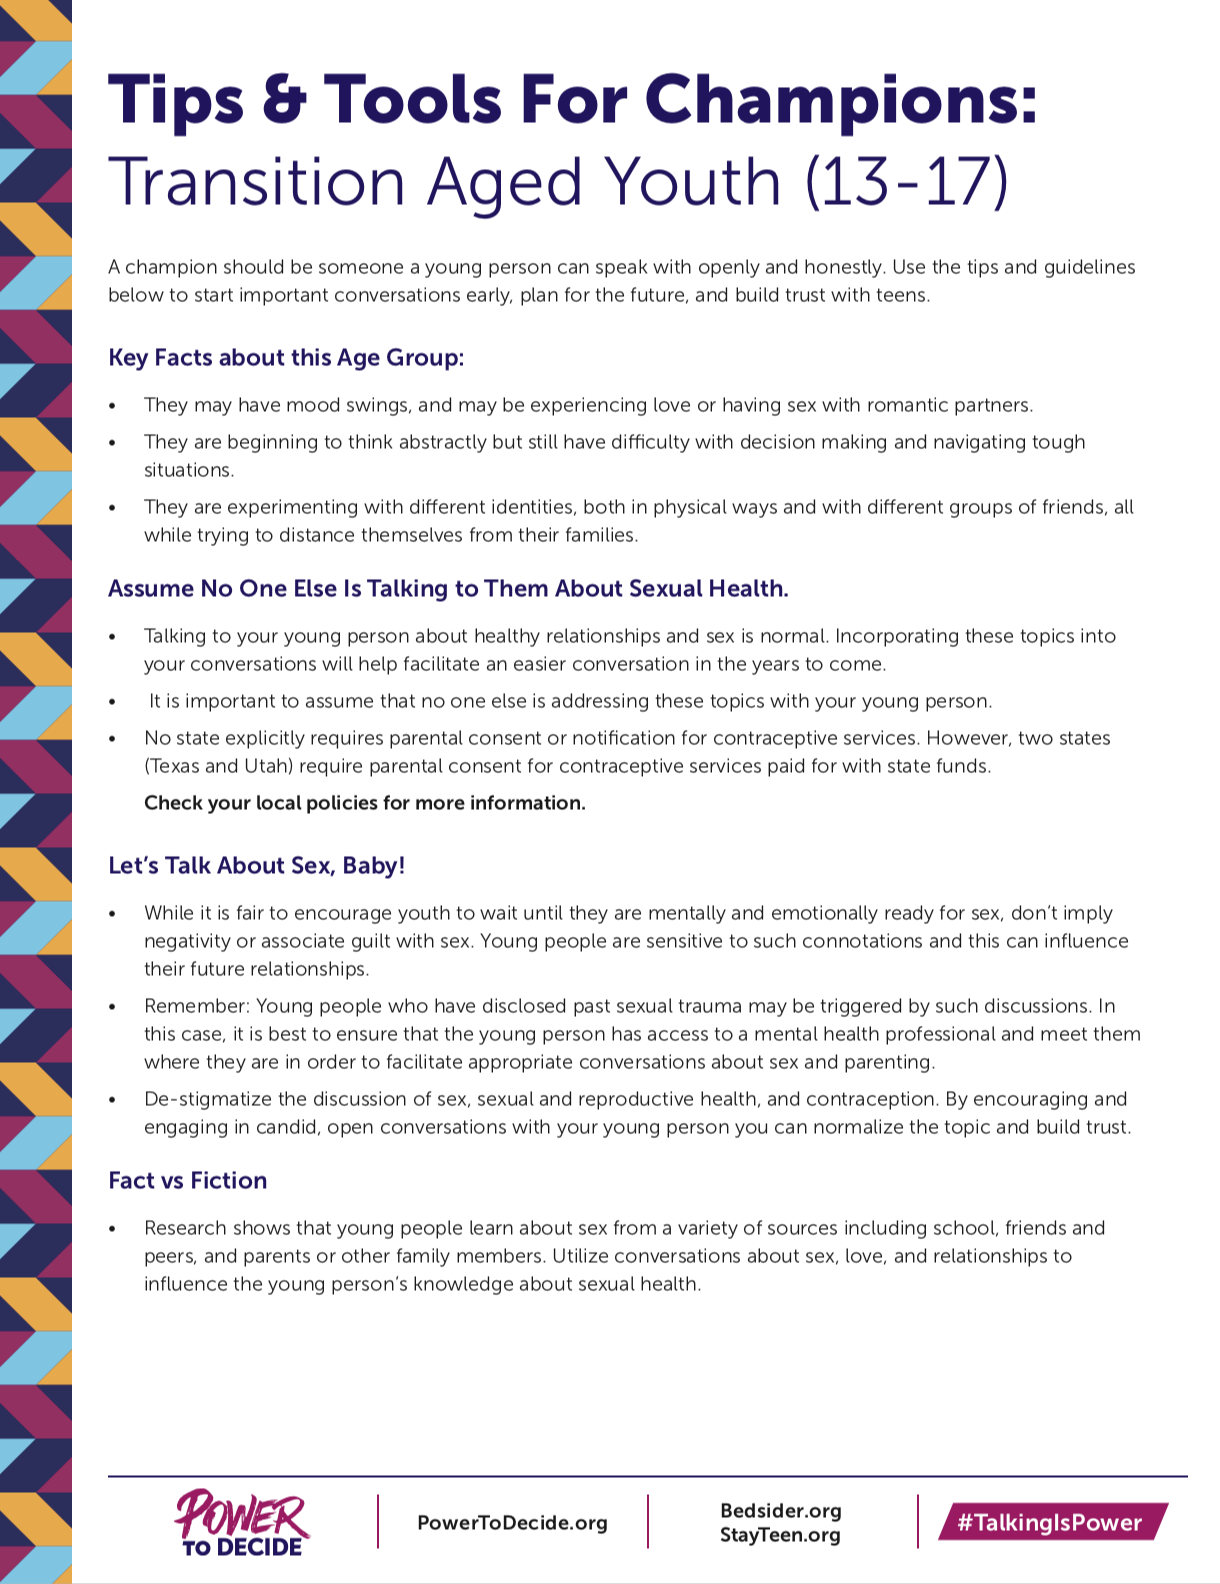 #TalkingIsPower: Tips for Trusted Adults 13-17